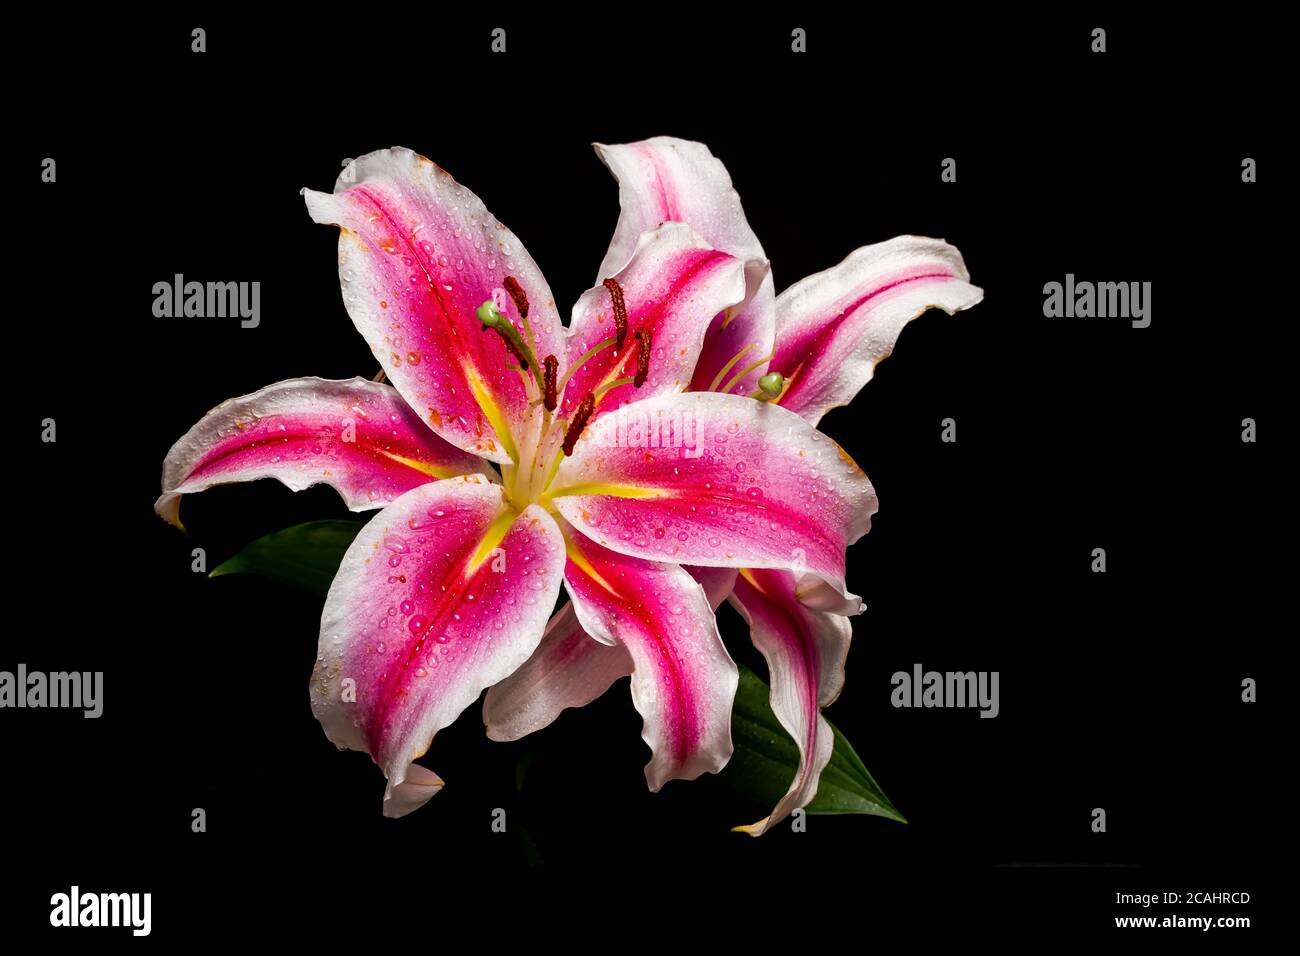 white and pink lily flower photographed on black background Stock Photo